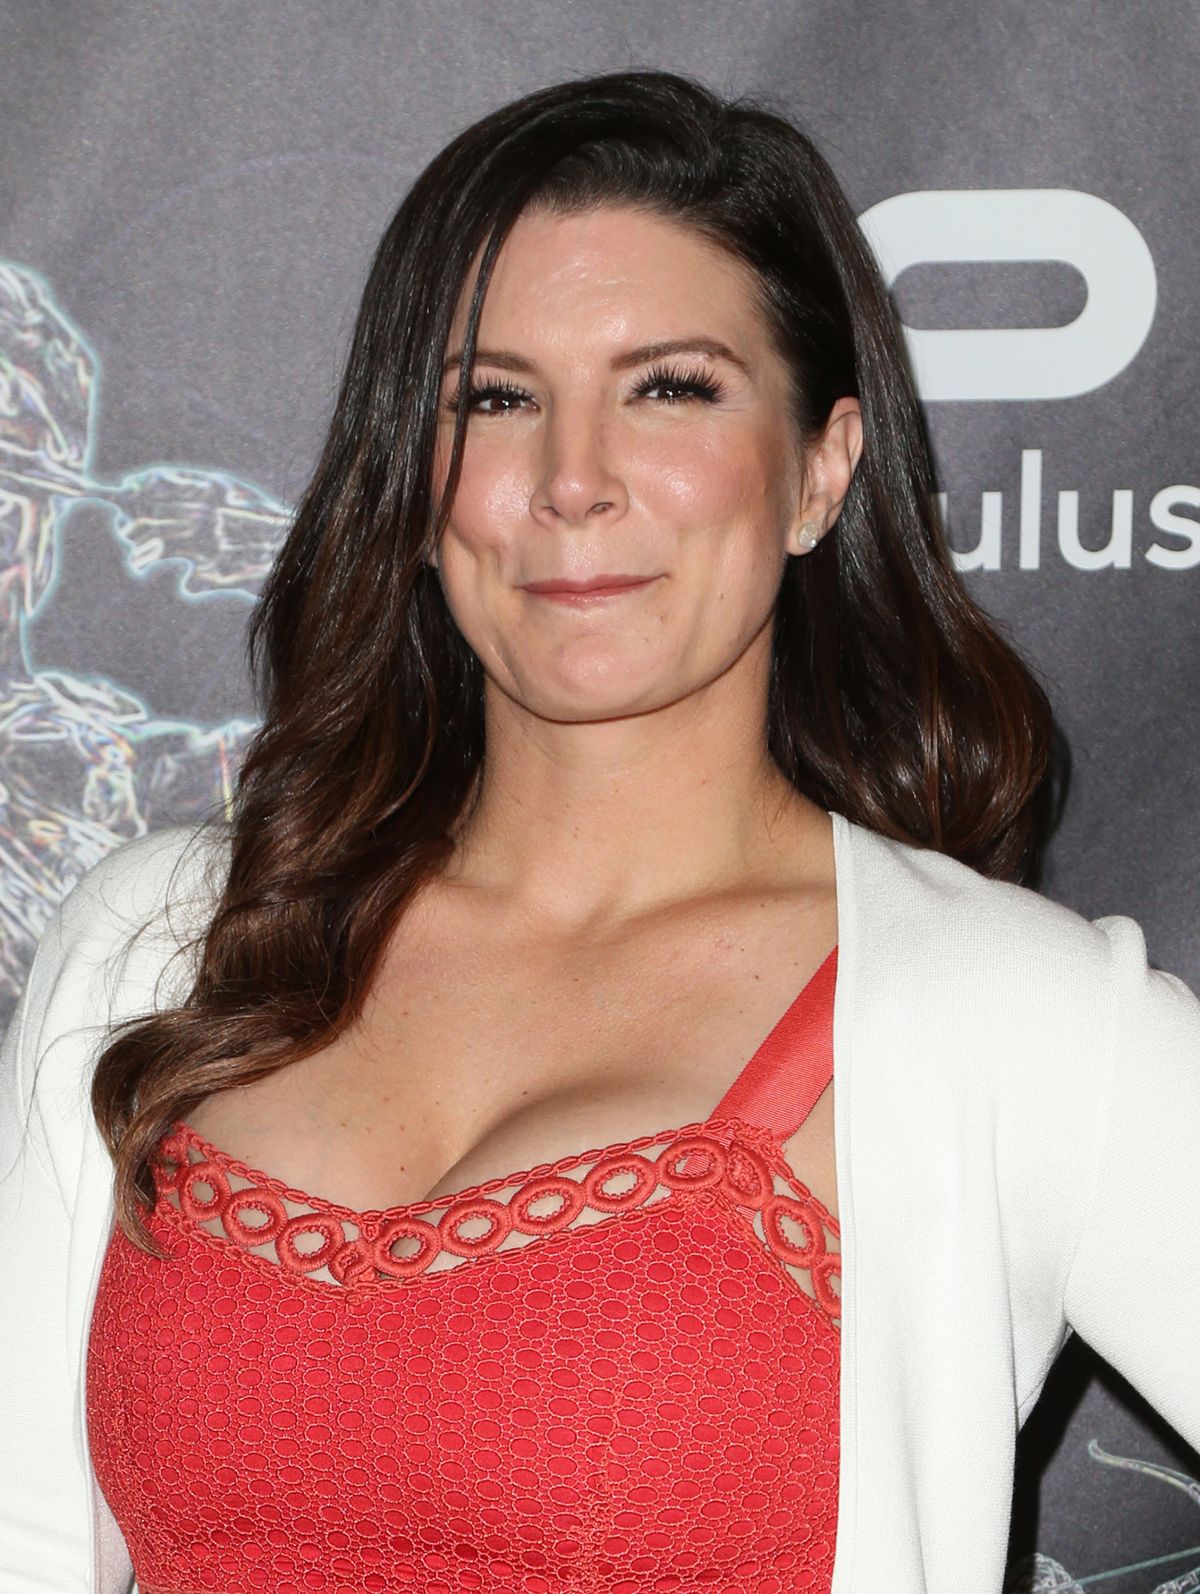 gina-carano-at-artemis-women-in-action-film-festival-gala-in